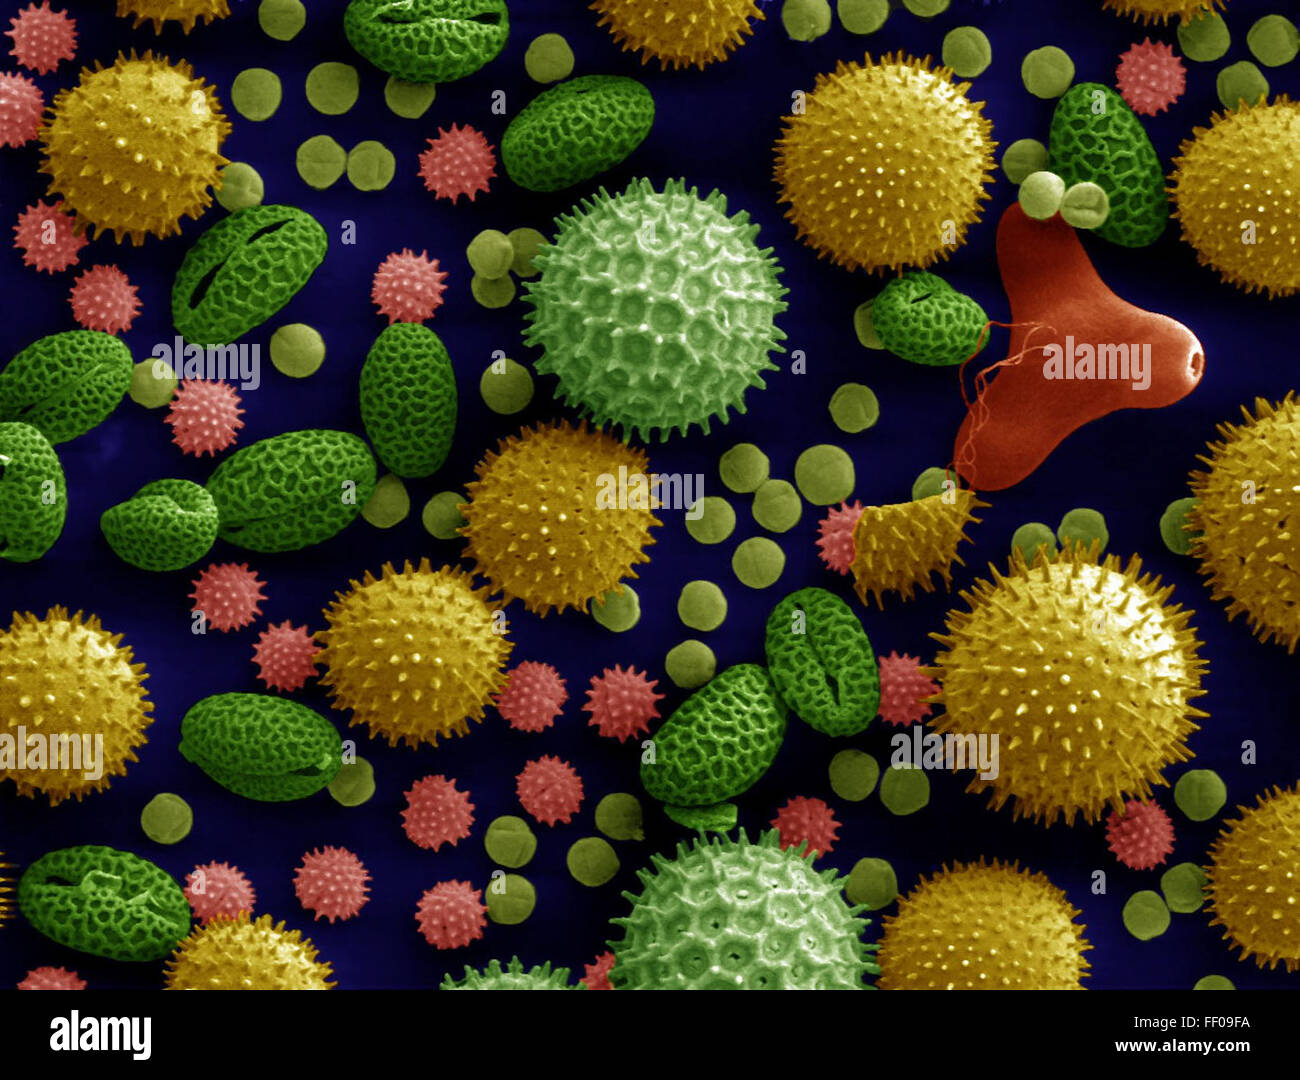 Pollen from a Variety of Common Plants, Colorized and Magnified 500x Pollen from a Variety of Common Plants, Colorized and Magnified Stock Photo